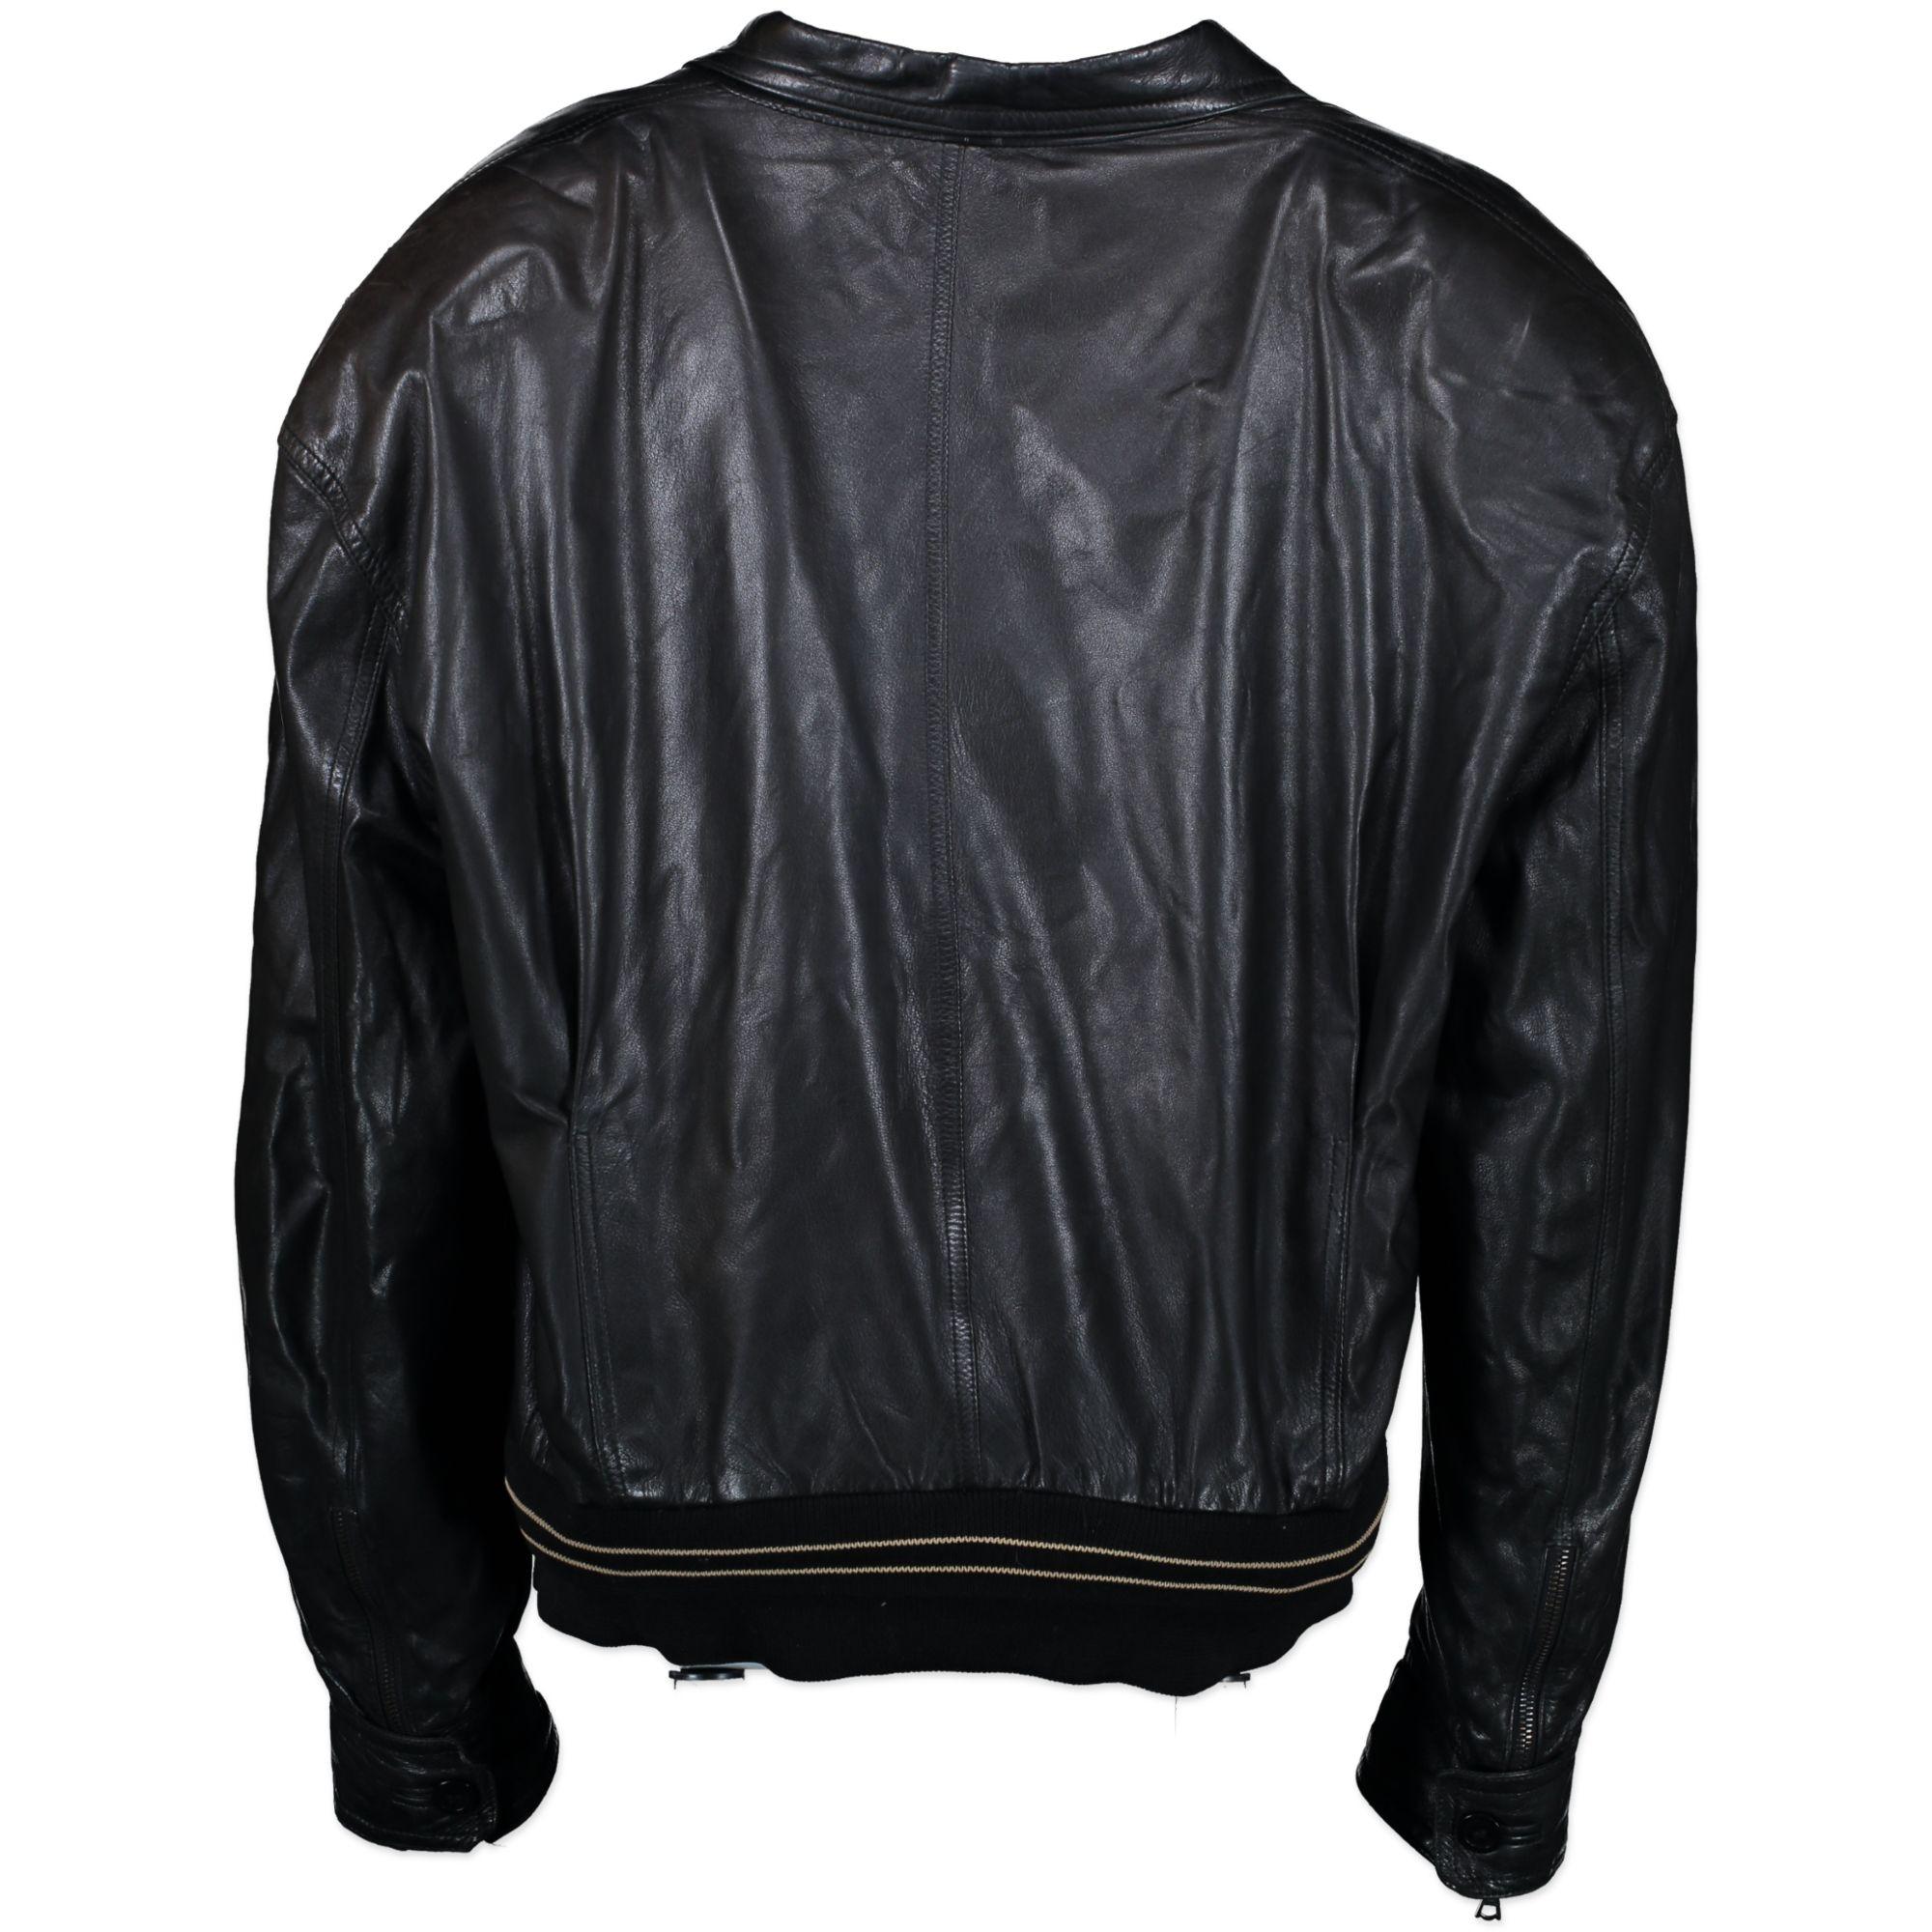 Good vintage condition

Versace Vintage Leather Black Jacket - Size TU

A must-have for every fashion lover!

This black leather jacket is crafted from extremely soft leather and closes with a small zipper and features two pockets on the front. A